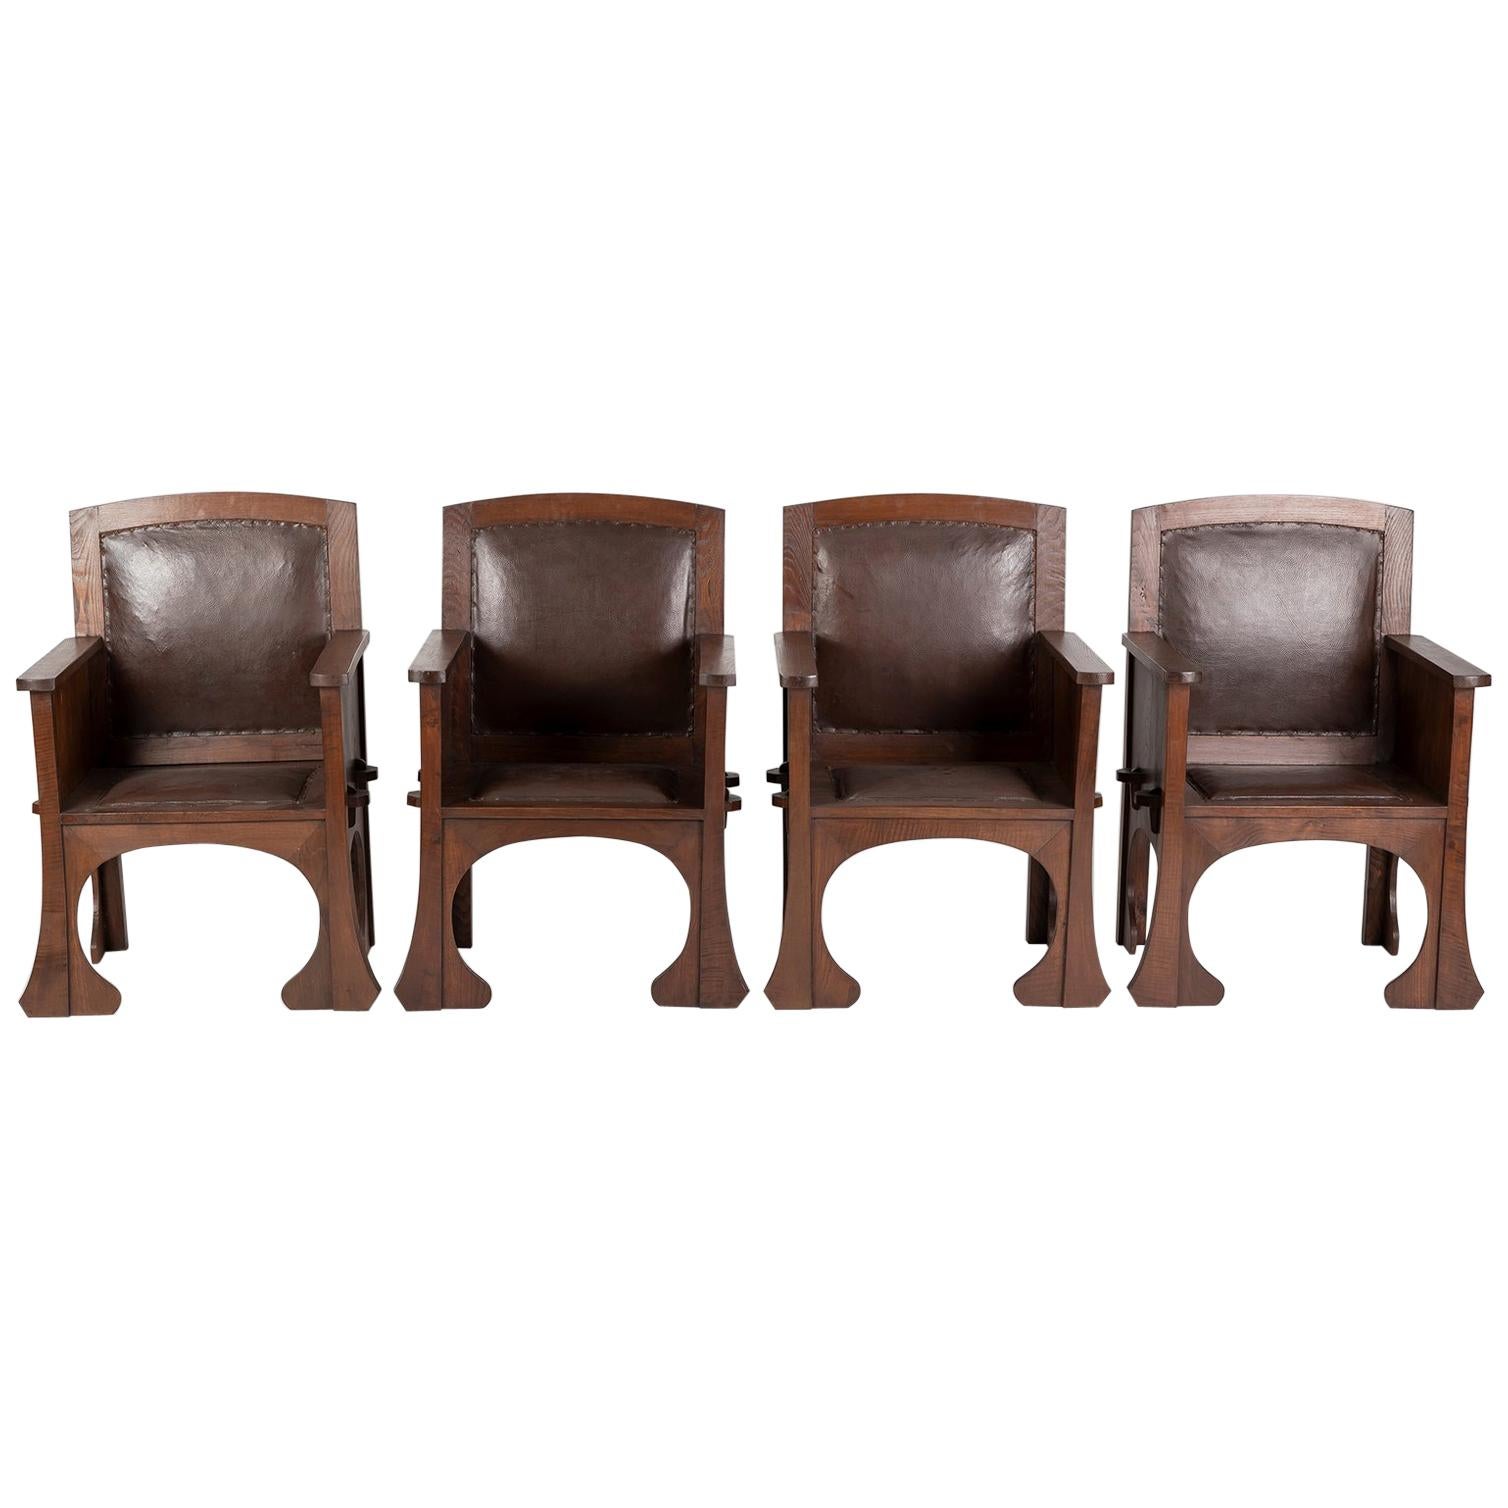 Set of Four Portuguese Country Rustic Style Chairs in Solid Hardwood and Leather For Sale